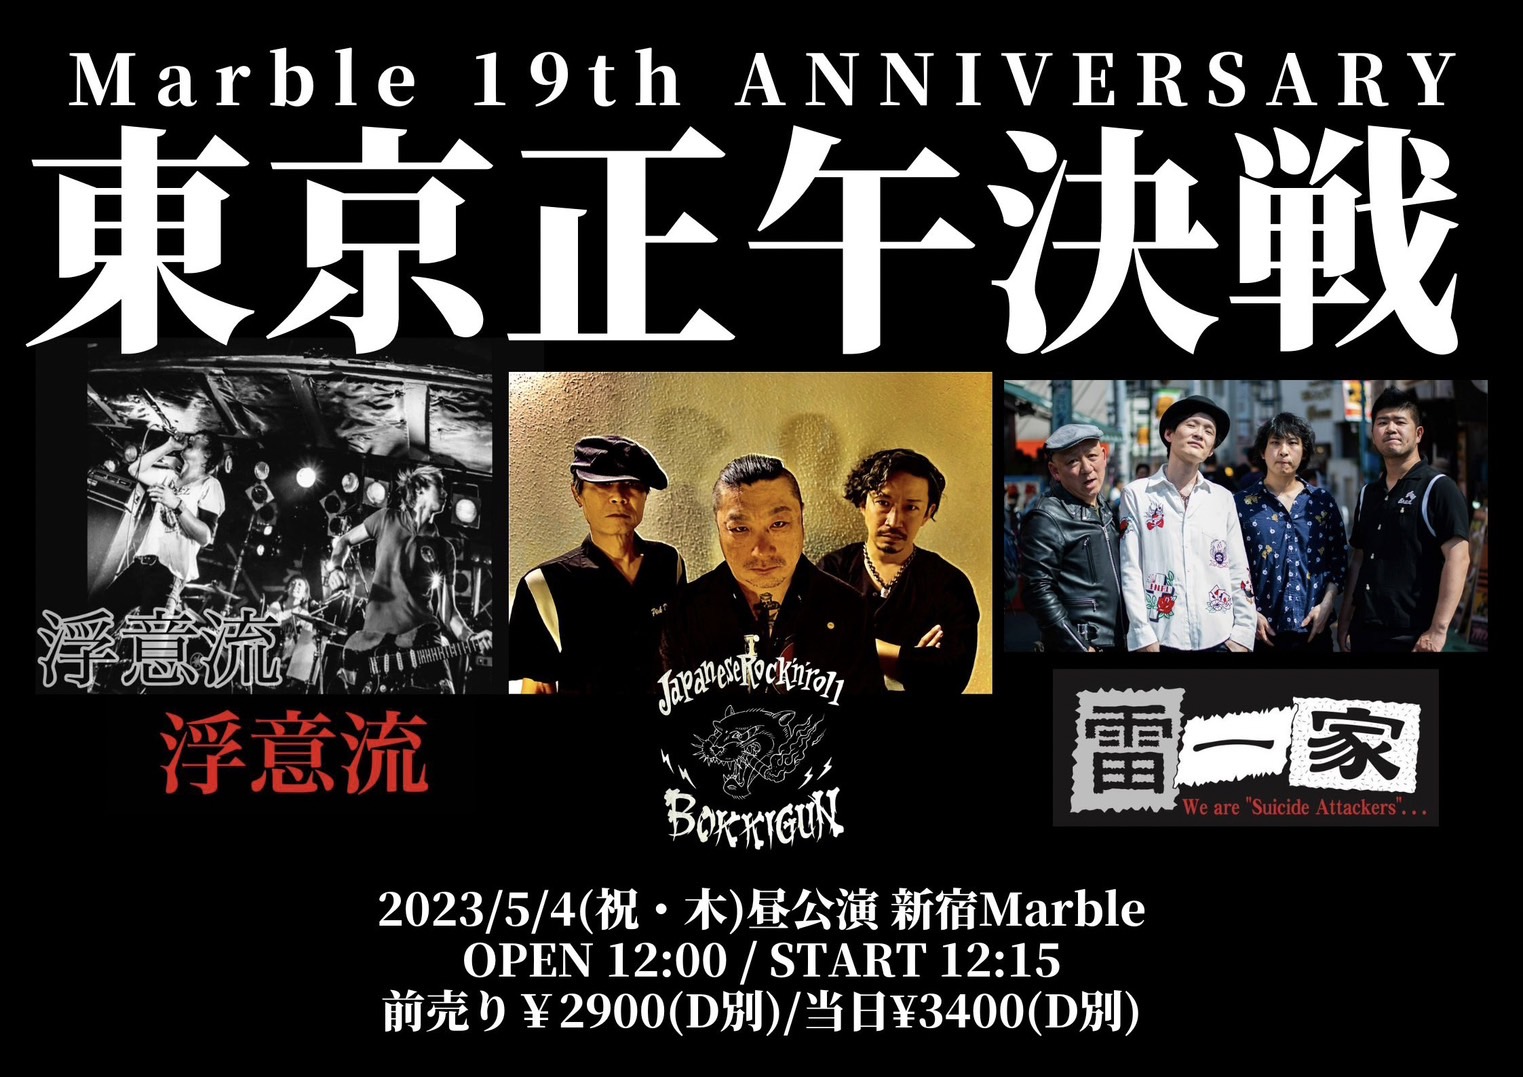 Marble 19th ANNIVERSARY「東京正午決戦」